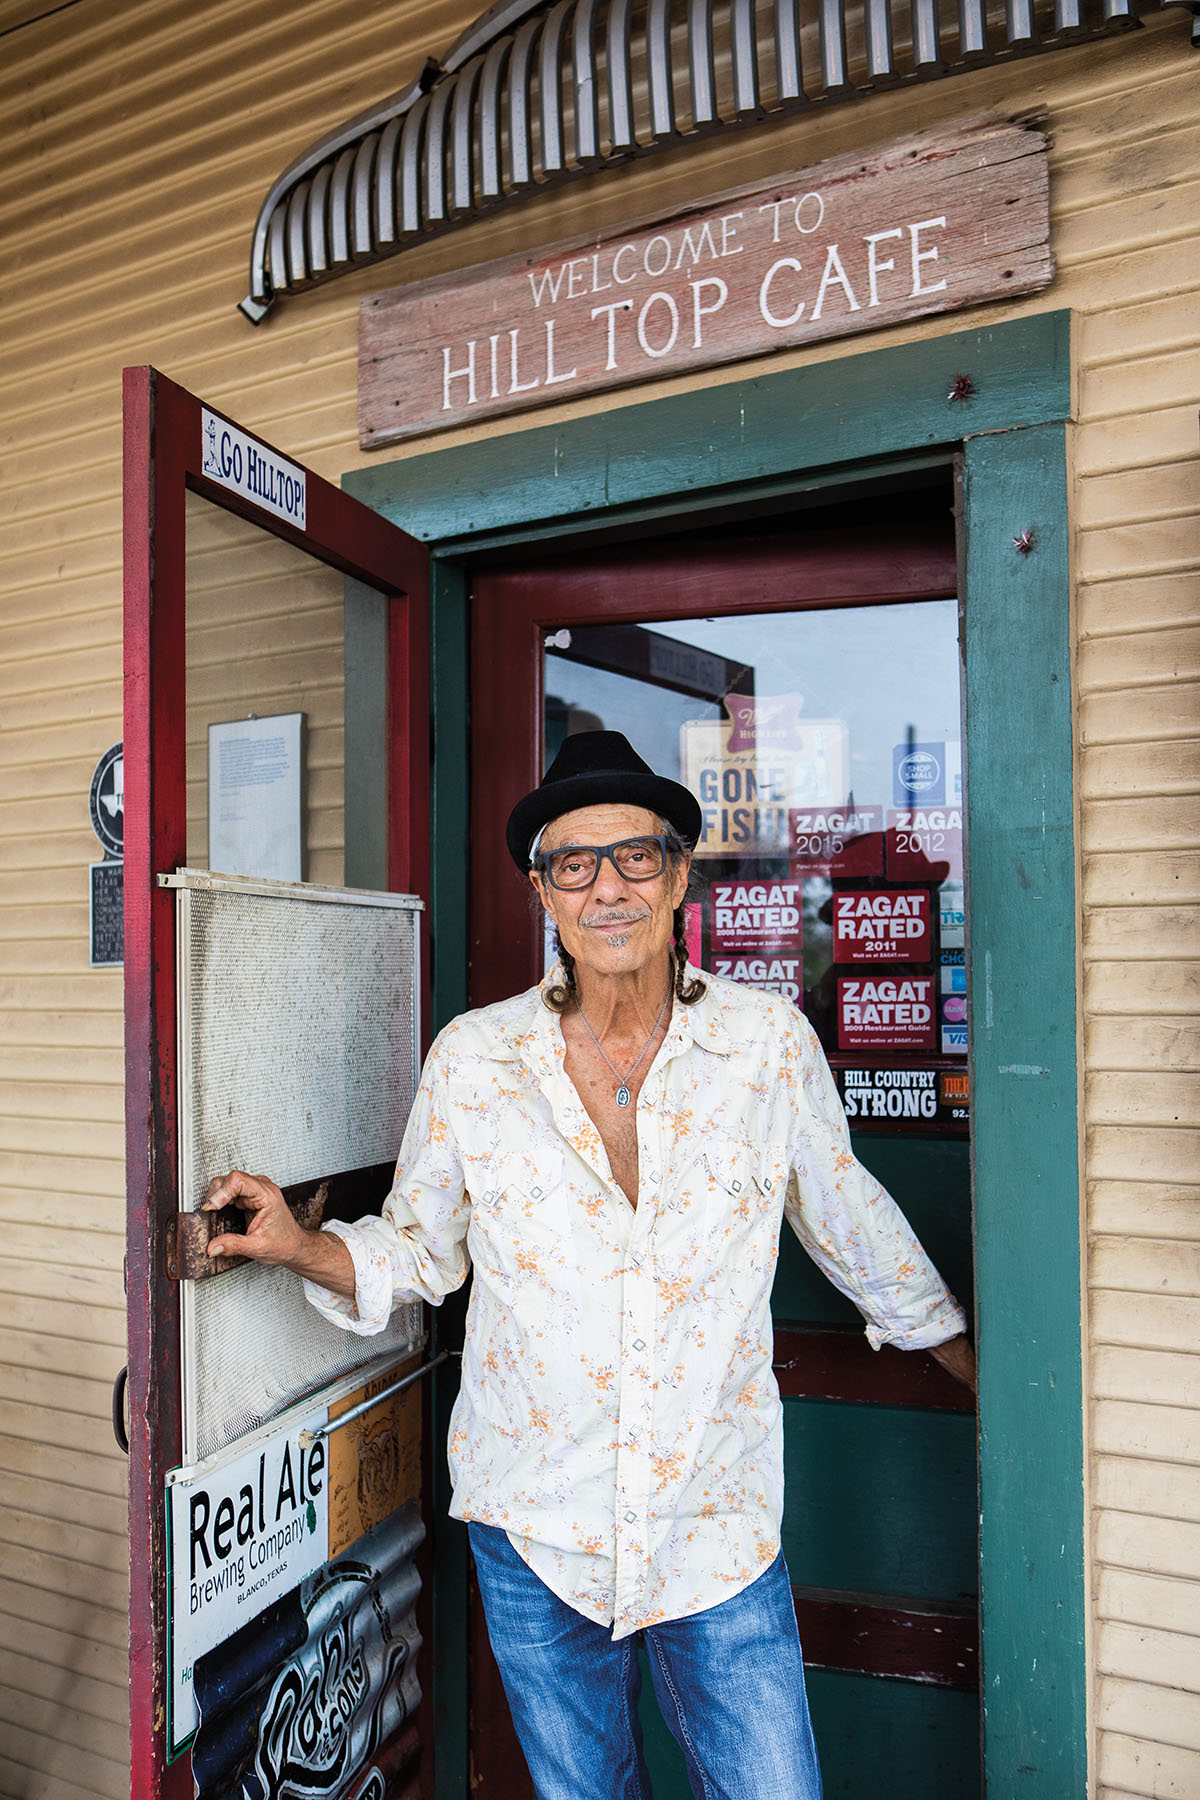 Johnny Nicholas (owner) stand outside of Hill Top Cafe